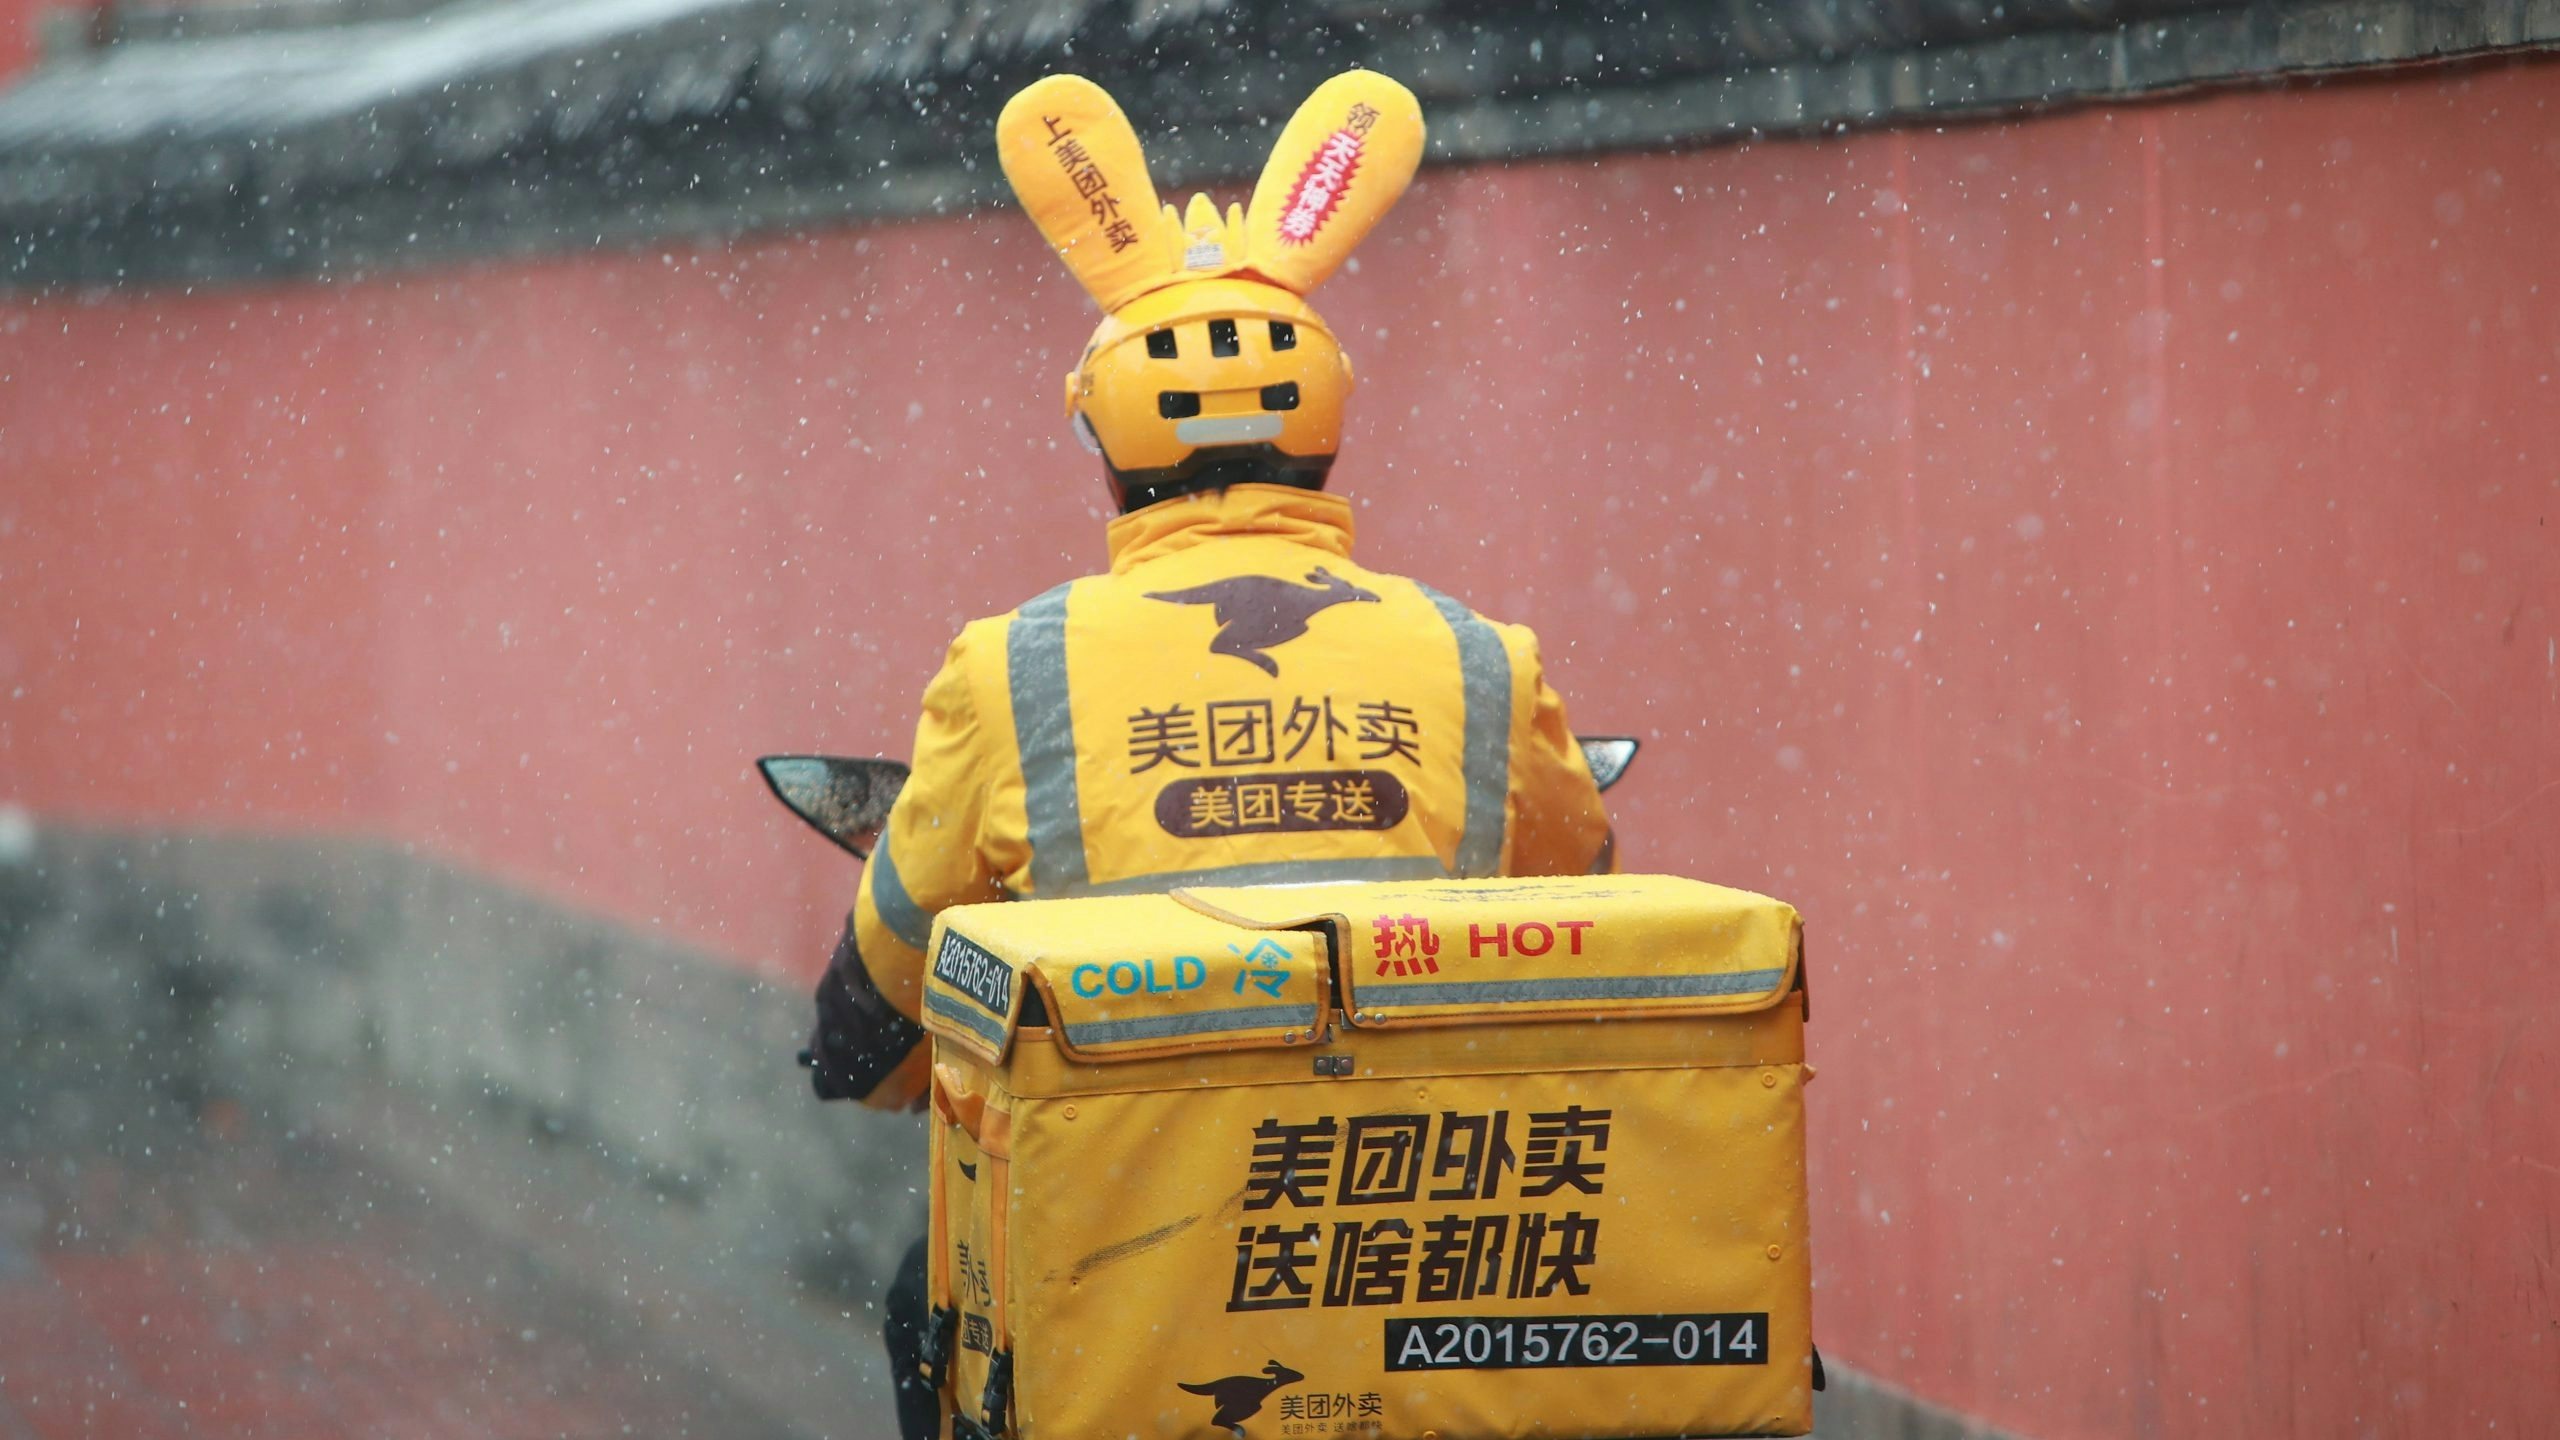 China’s e-commerce giants have jumped headfirst into the growing grocery delivery trend, but some netizens are shaming them for the social ramifications. Photo: Meituan Waimai's Weibo.